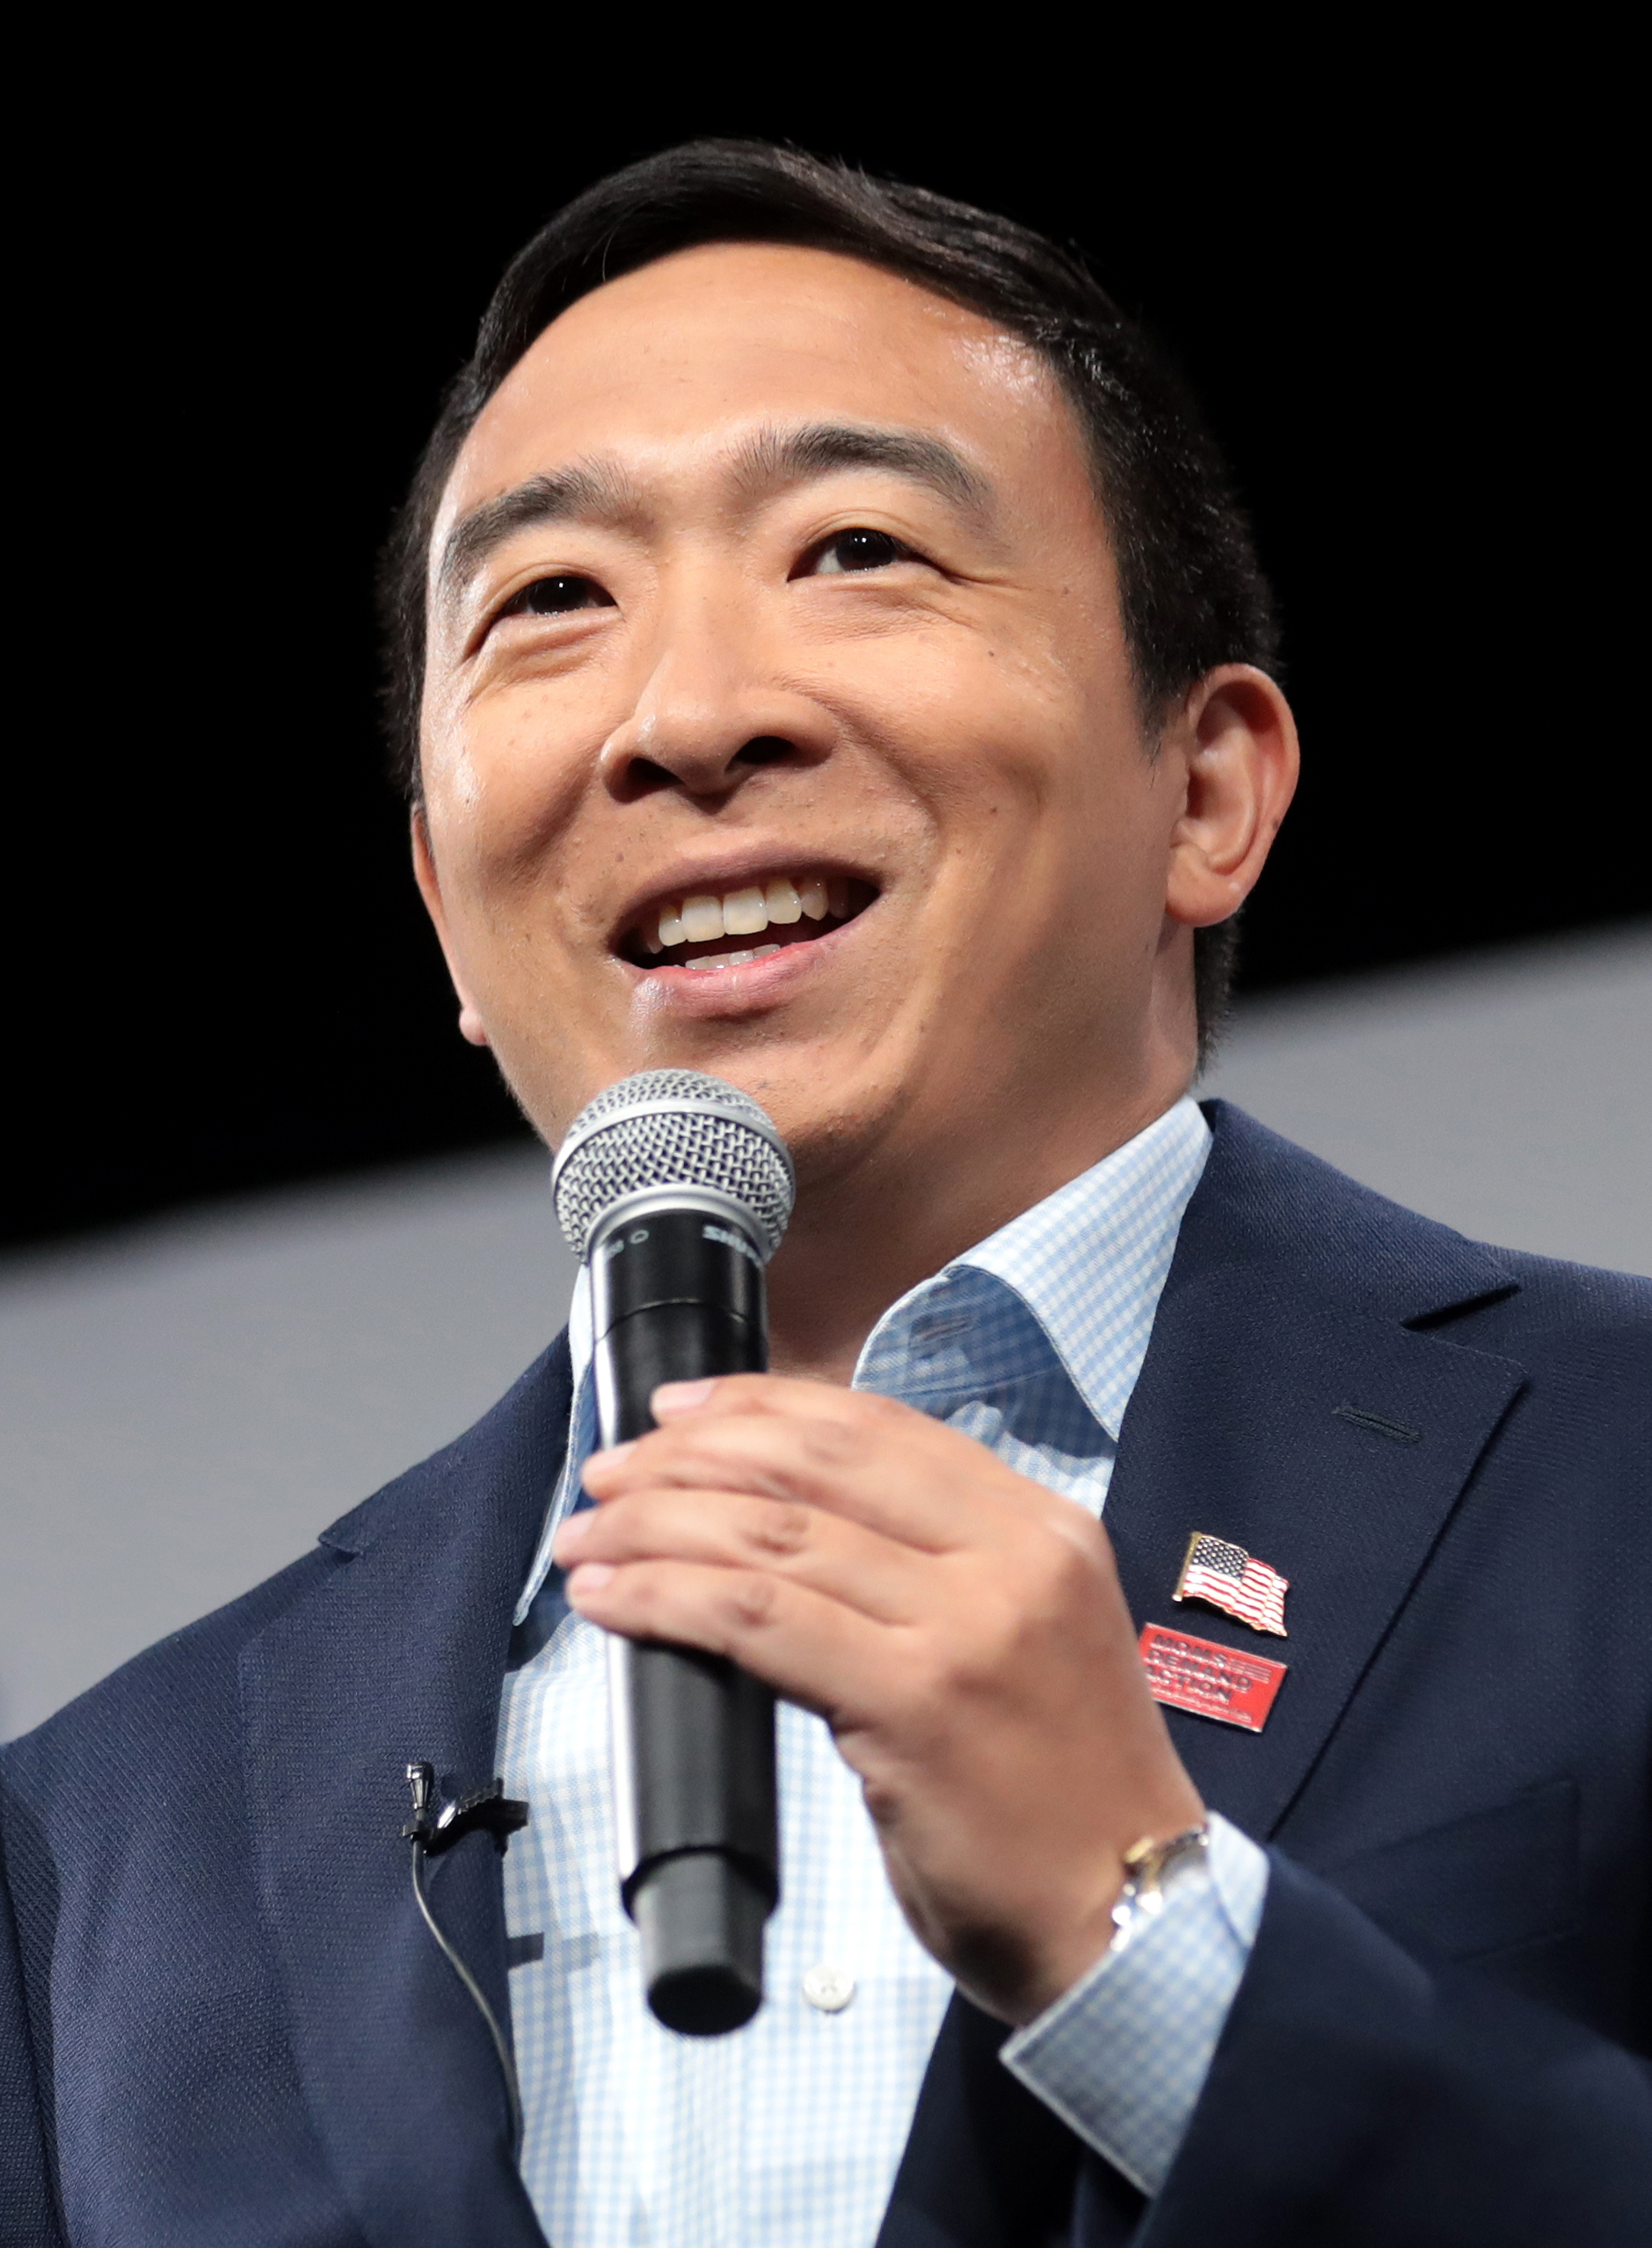 5. Andrew Yang is the first Taiwanese American as an American Presidential candidate 2020